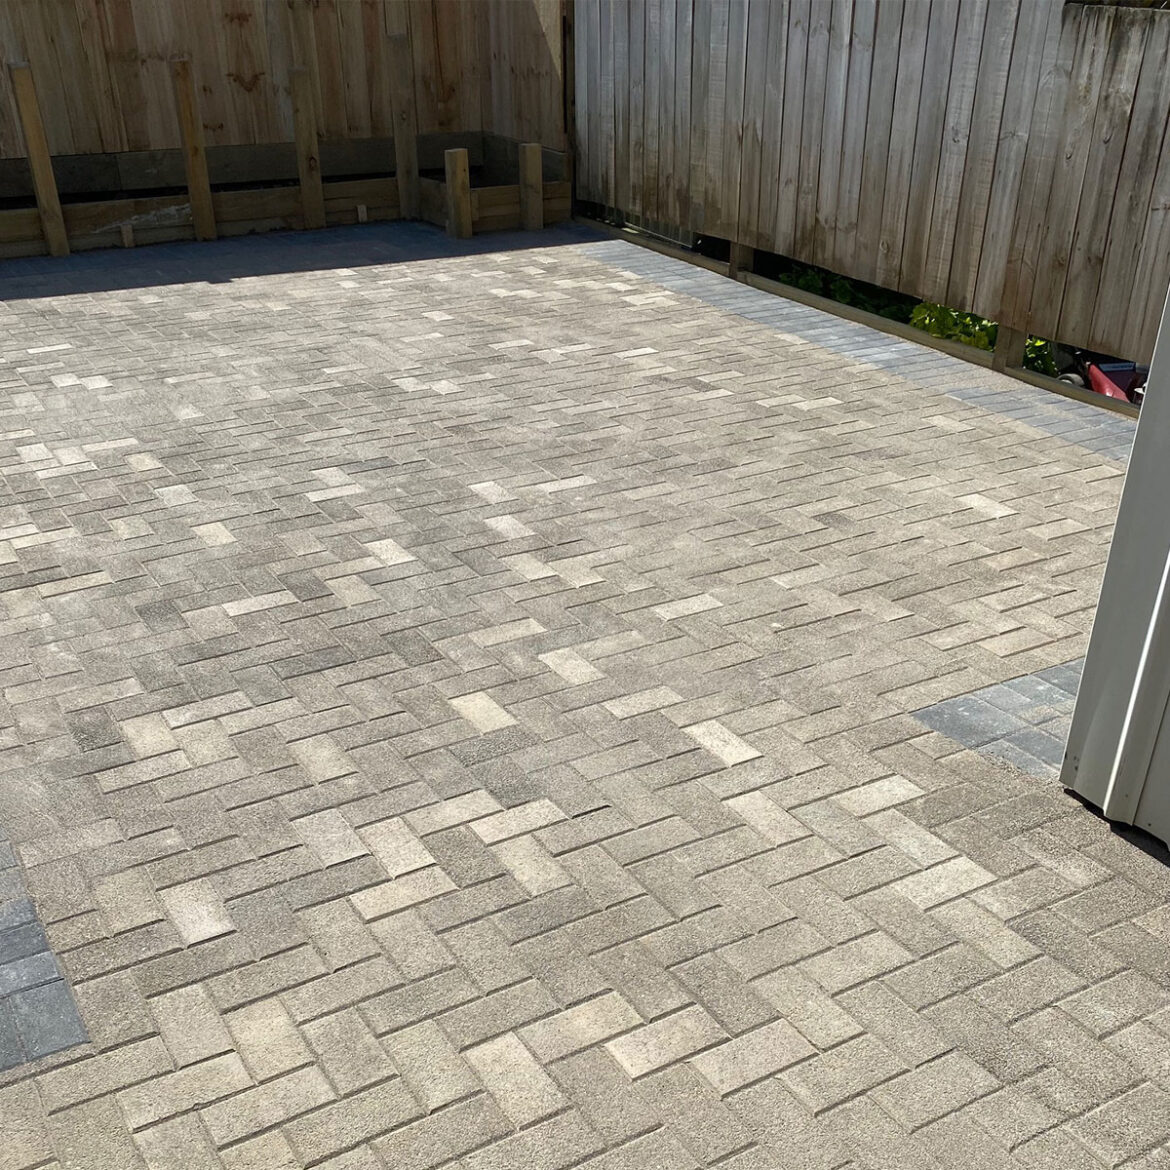 Riggas East Auckland Paving Services